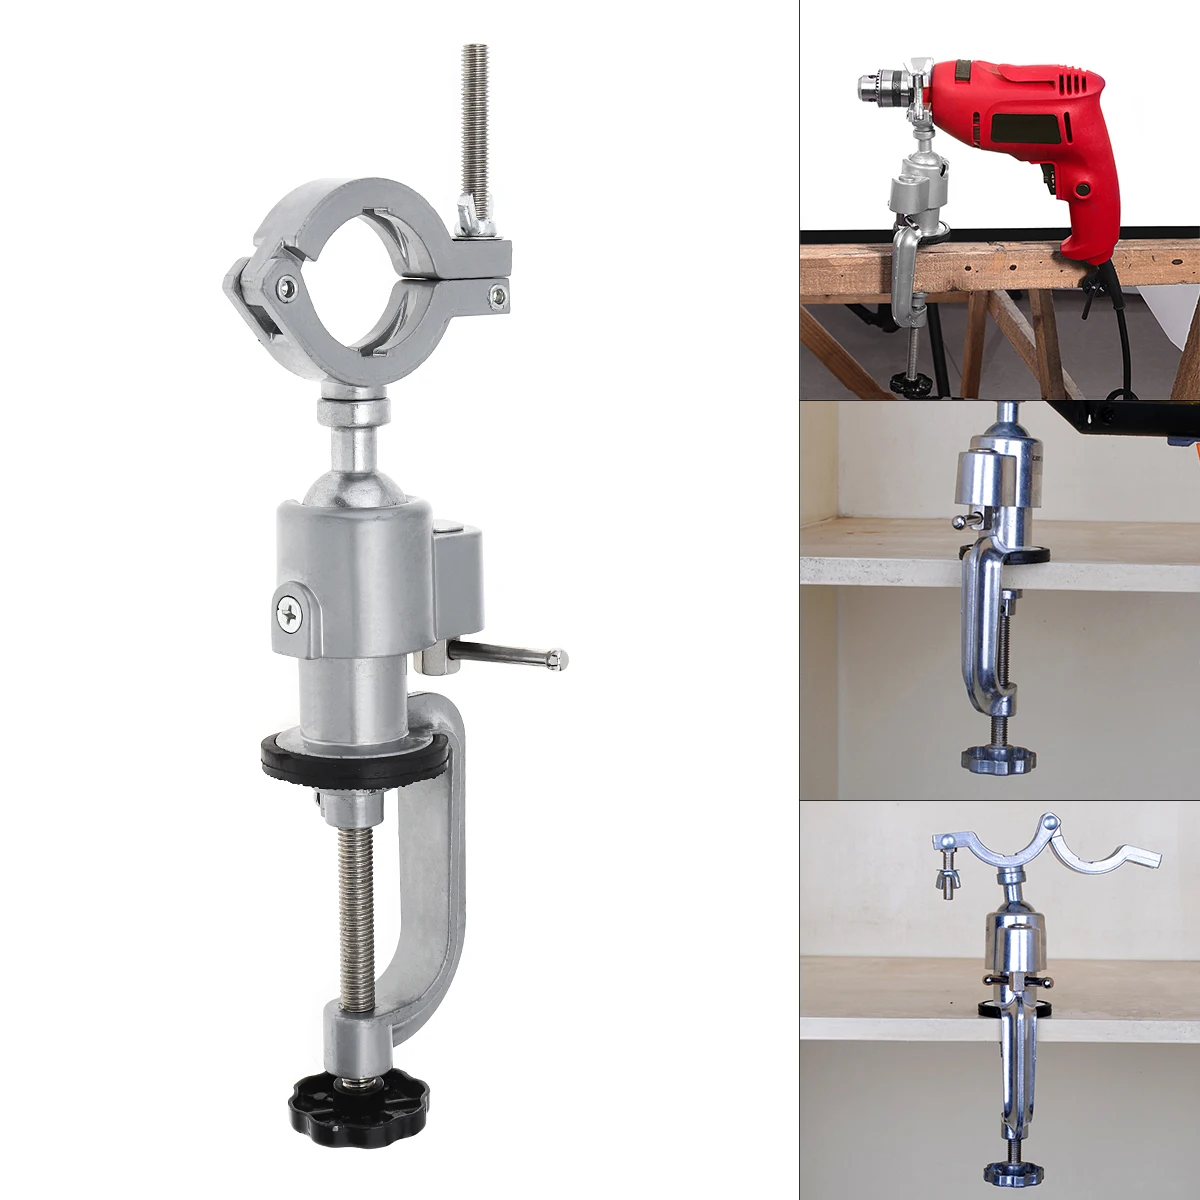 Details about   New 3" Universal Aluminum Body Work Table Vise Bench Clamp Rotating Jaw Heat 